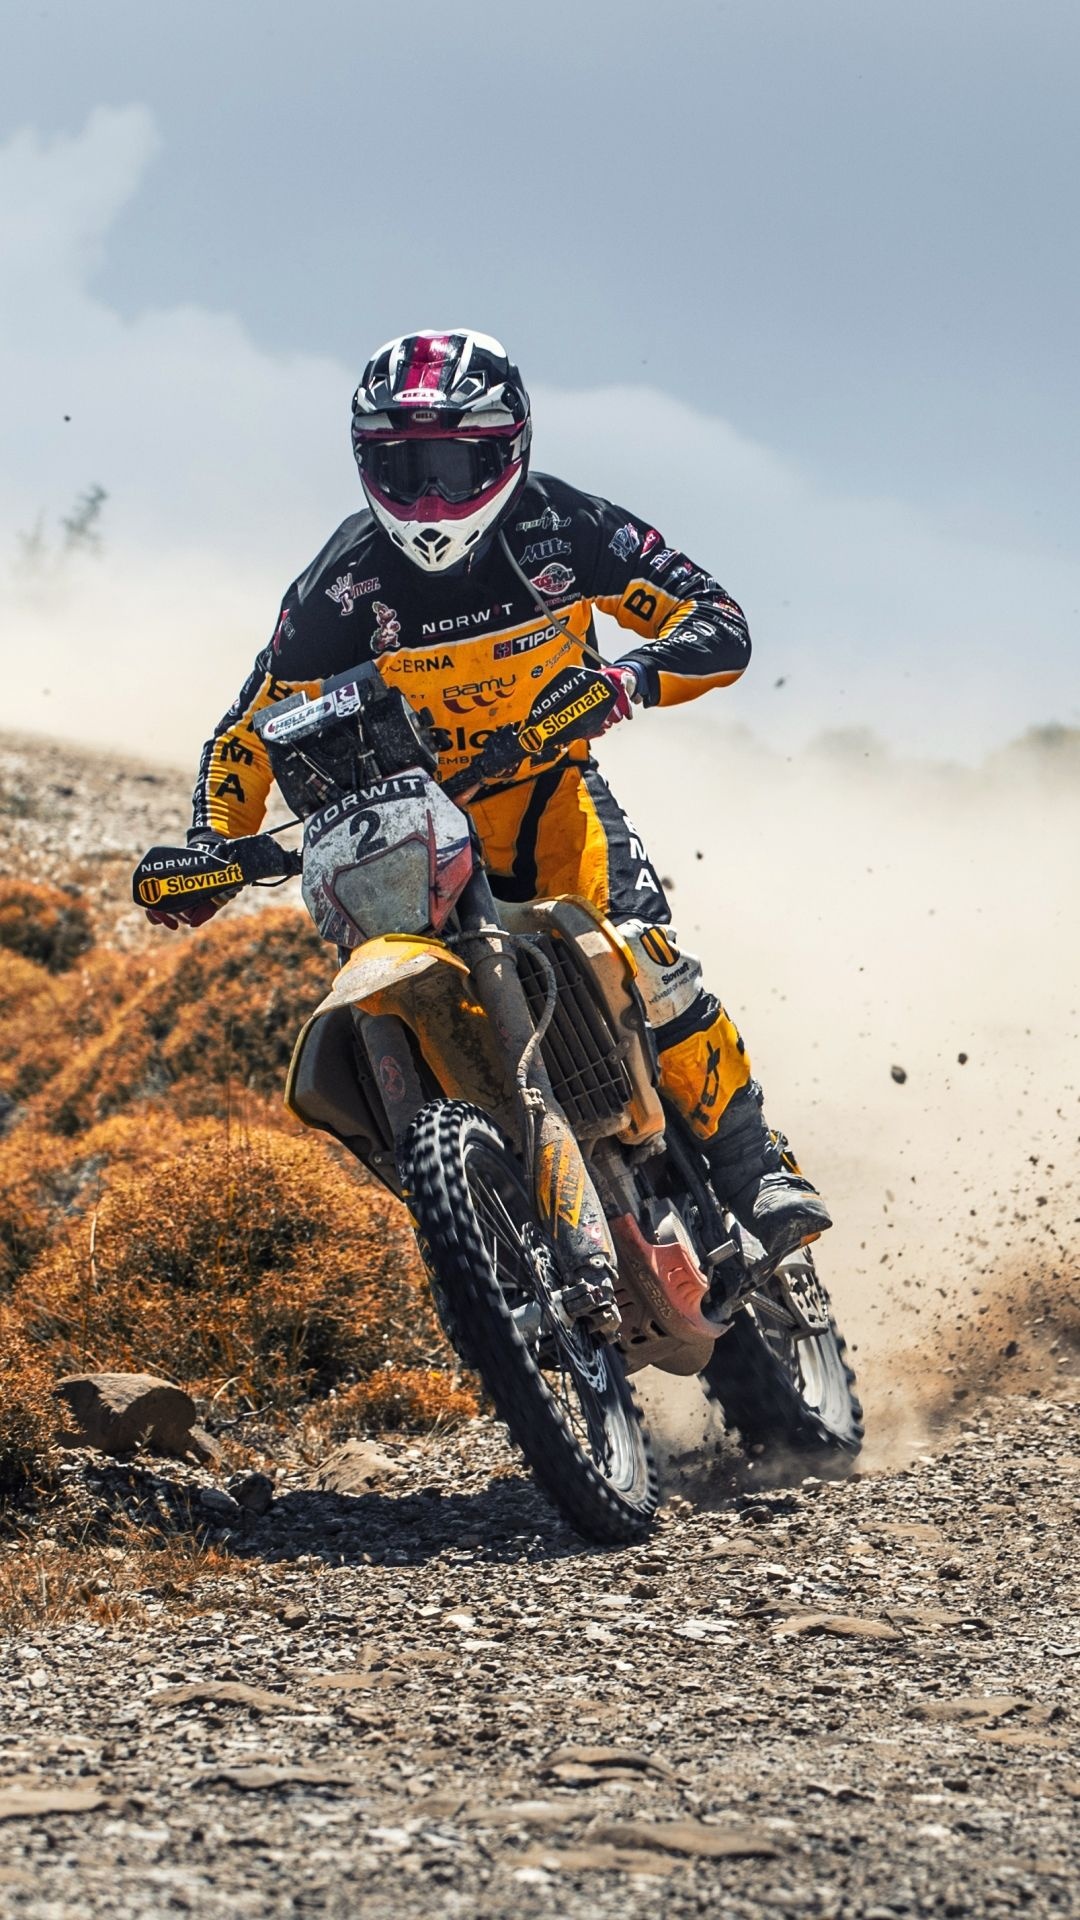 Enduro Motorbike: European Motorcycling Union, Norwit, Pursuit, Special Race Equipment. 1080x1920 Full HD Background.